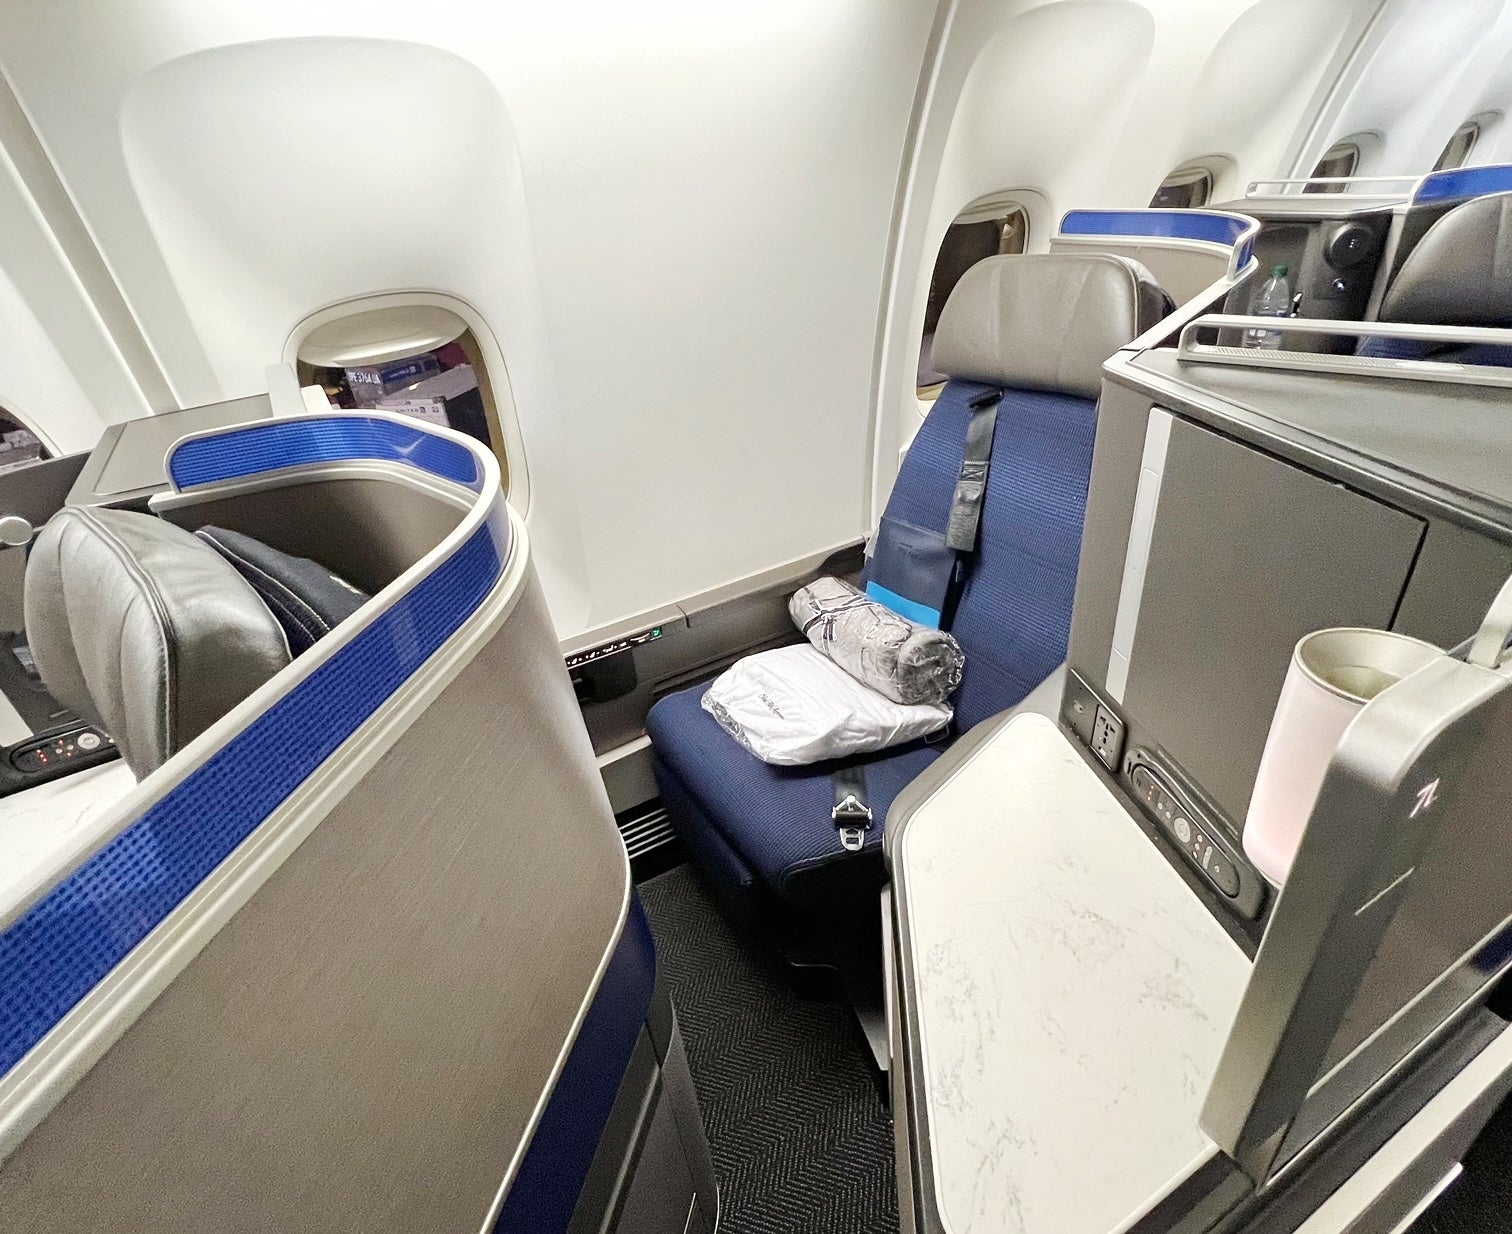 United Polaris business class seat on a Boeing 767